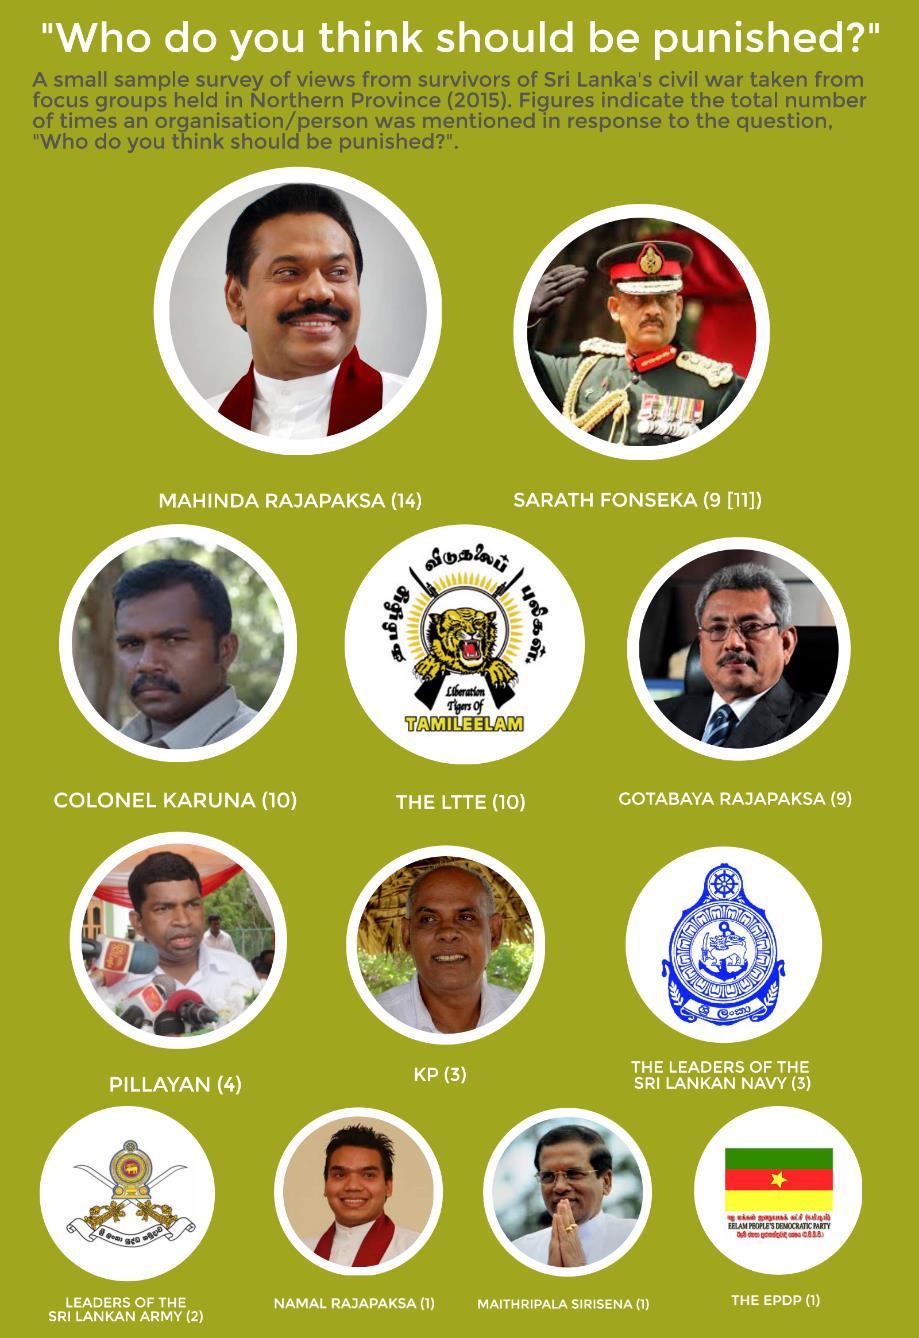 Figure 1: Infographic representing a small sample survey of views from survivors of Sri Lanka's civil war taken in focus groups held in Northern Province